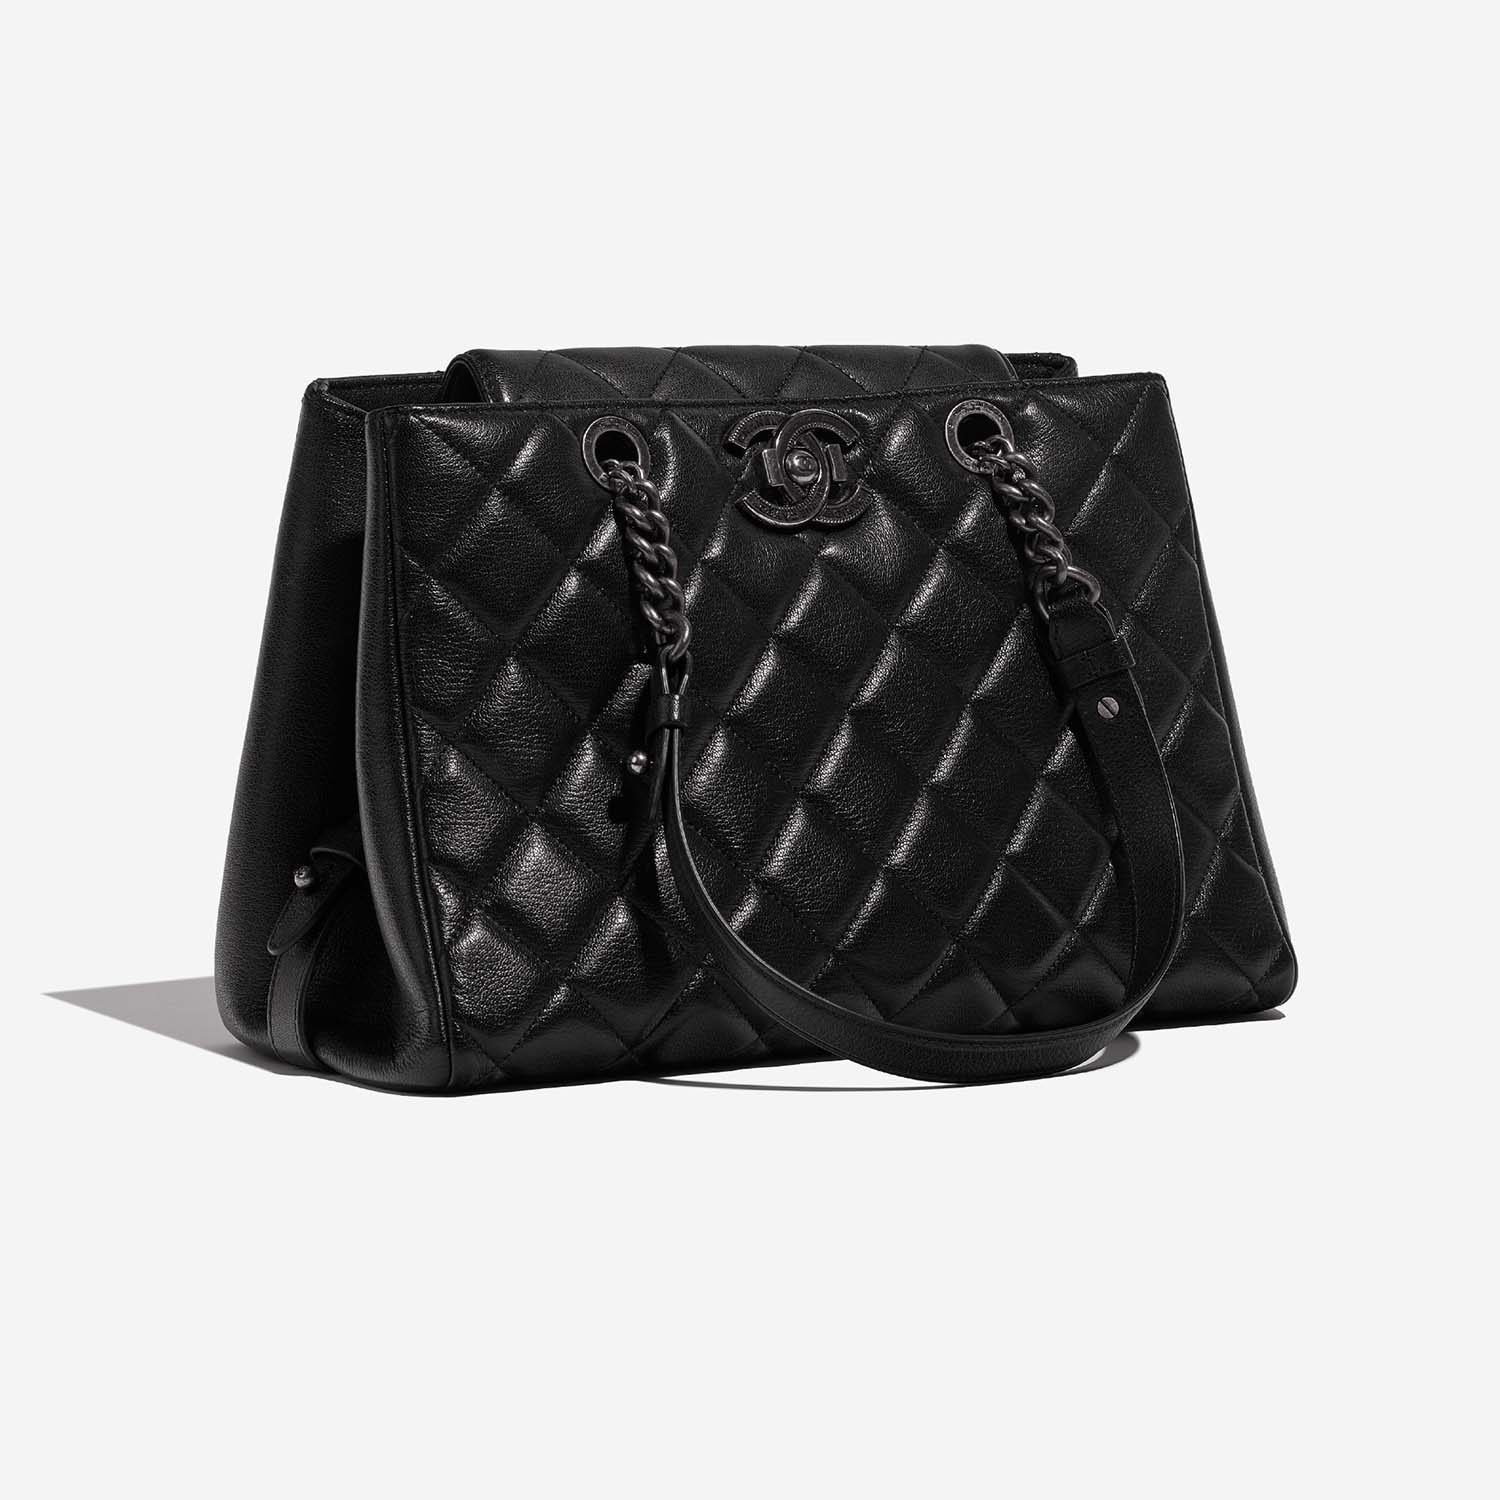 Chanel ShoppingTote Grand Black Side Front  | Sell your designer bag on Saclab.com